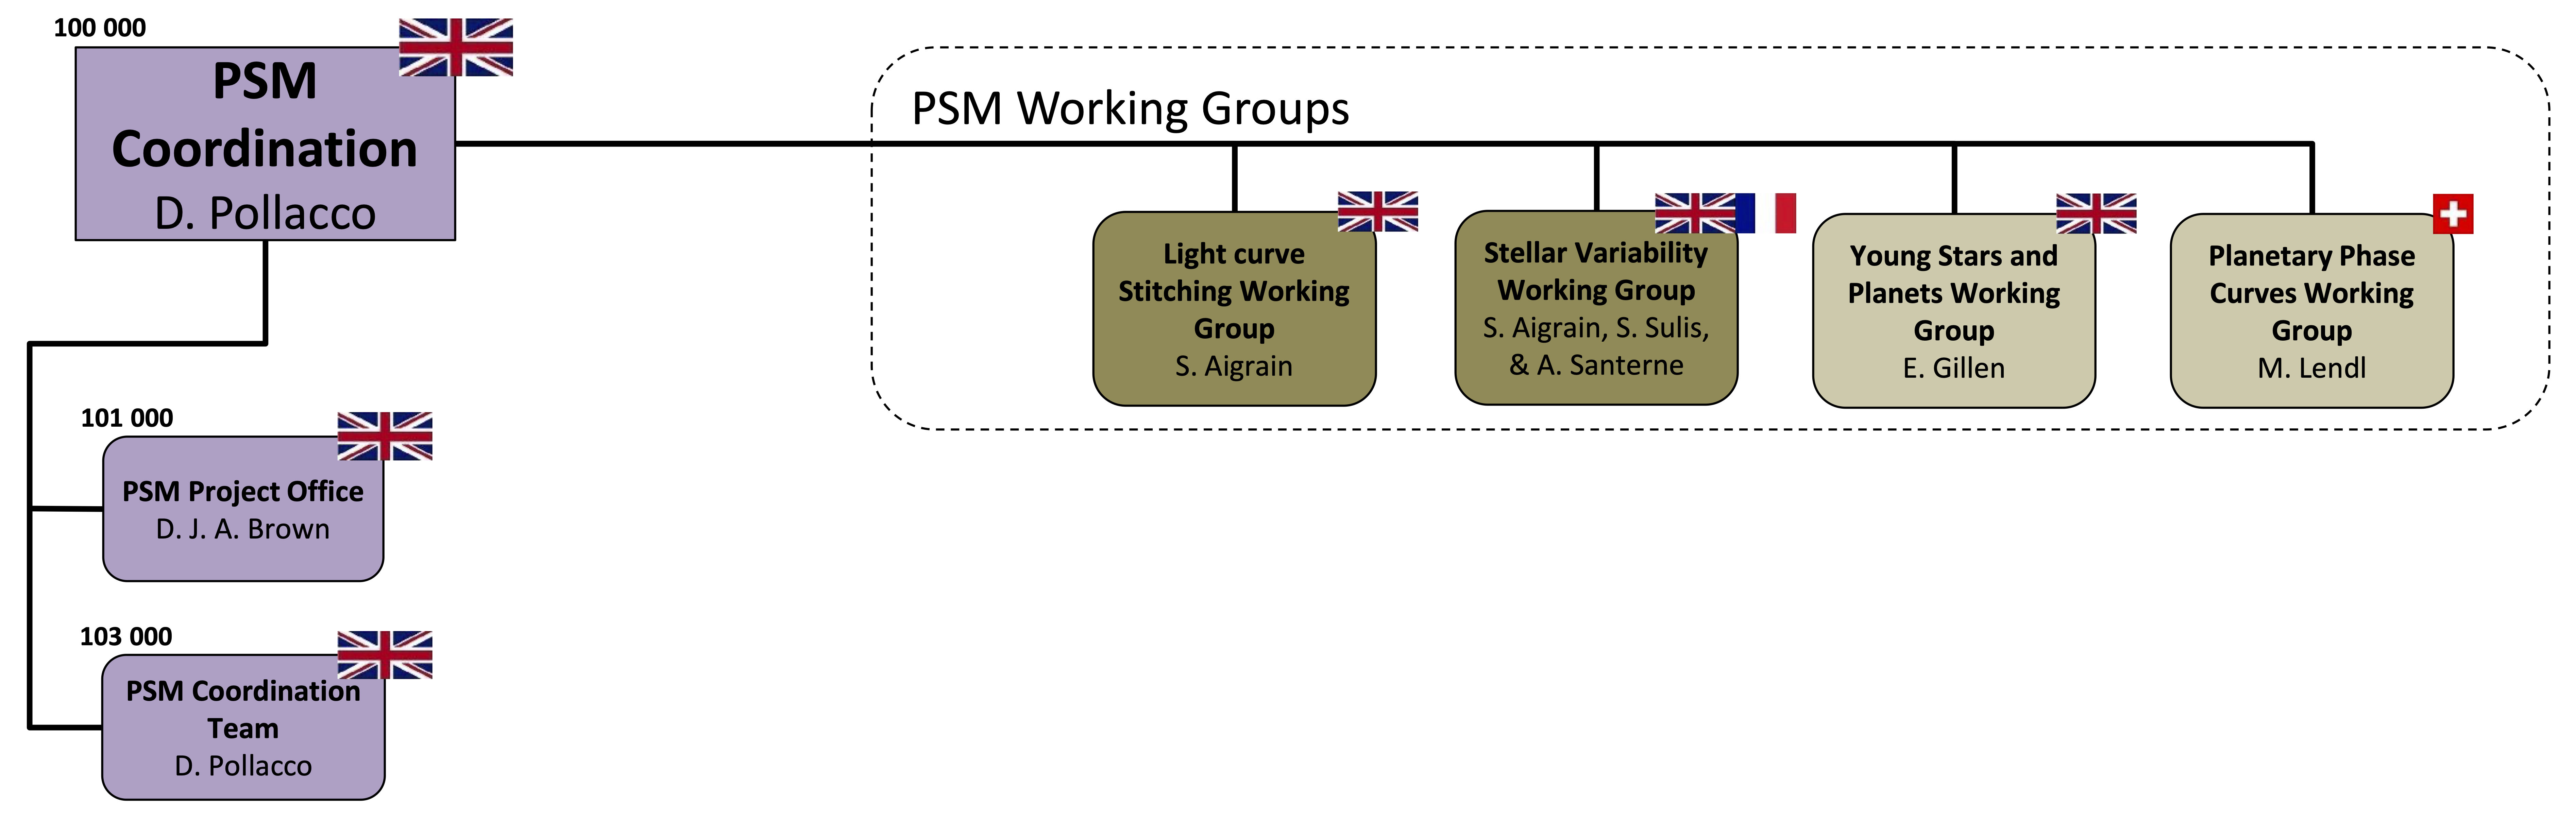 Organisation chart for the Management branch of the PSM, including Working Groups